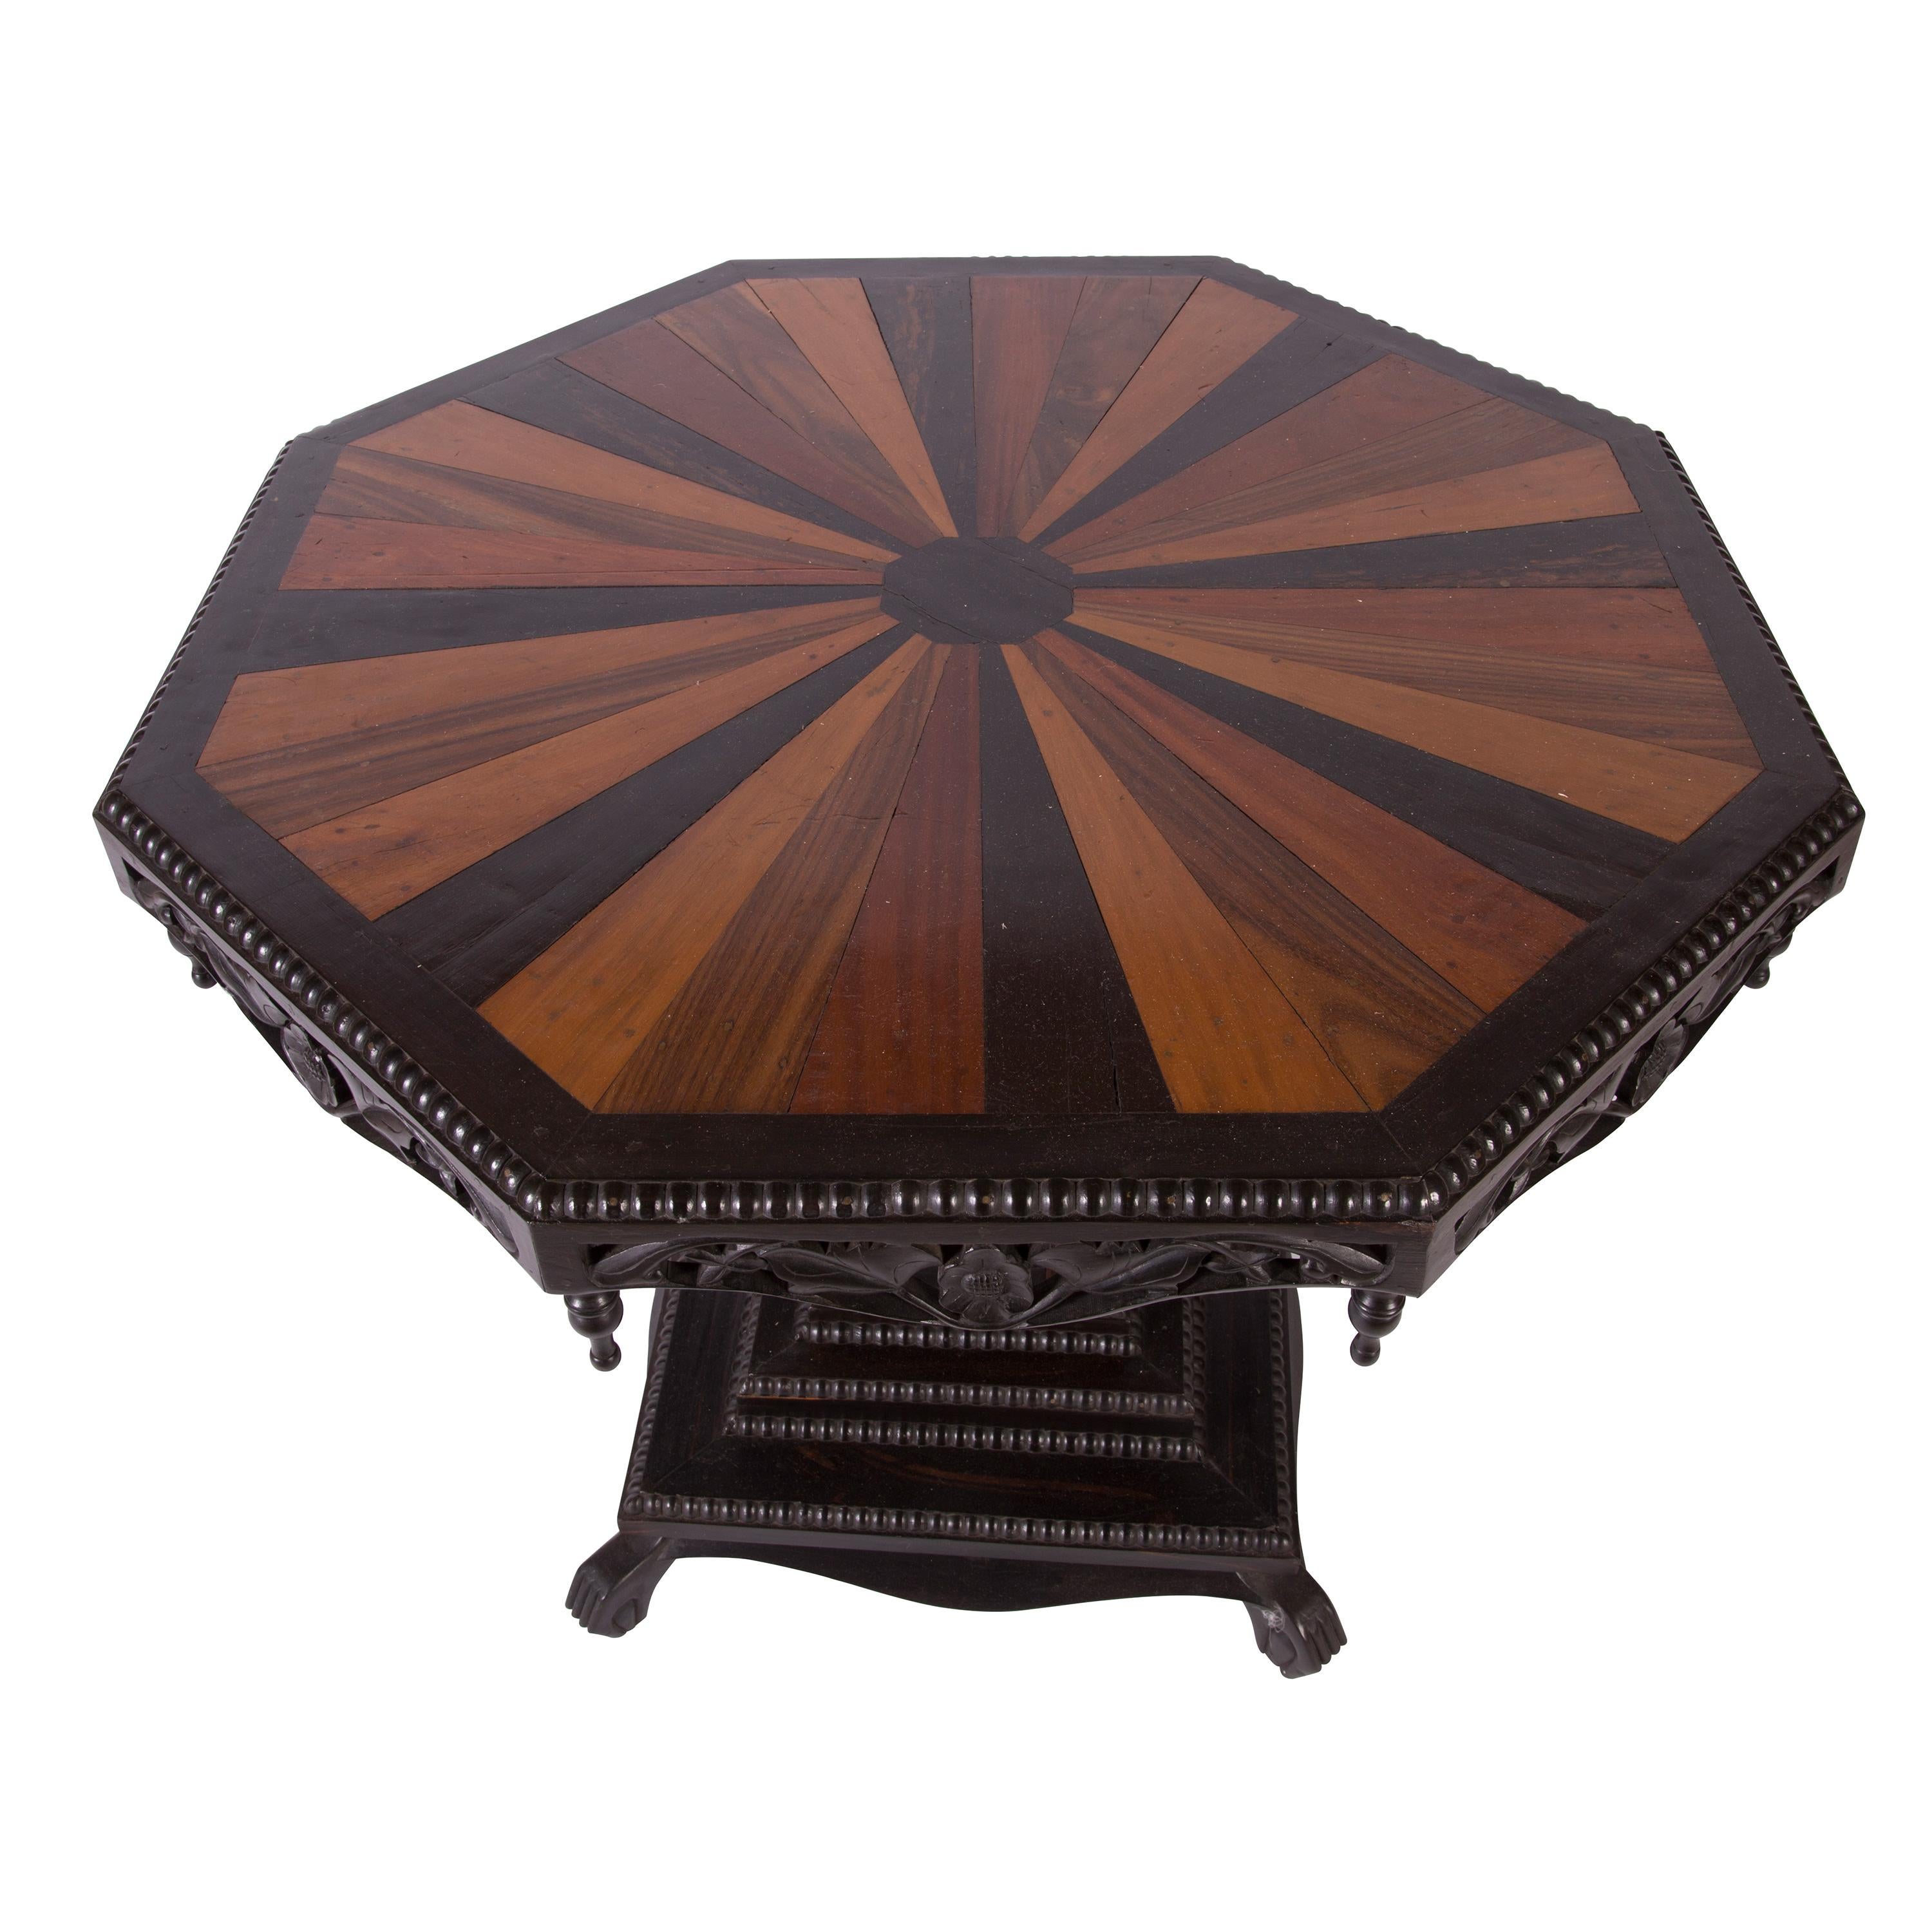 An Anglo-Indian carved ebony octagonal centre table with specimen wood segmented top, circa 1900.